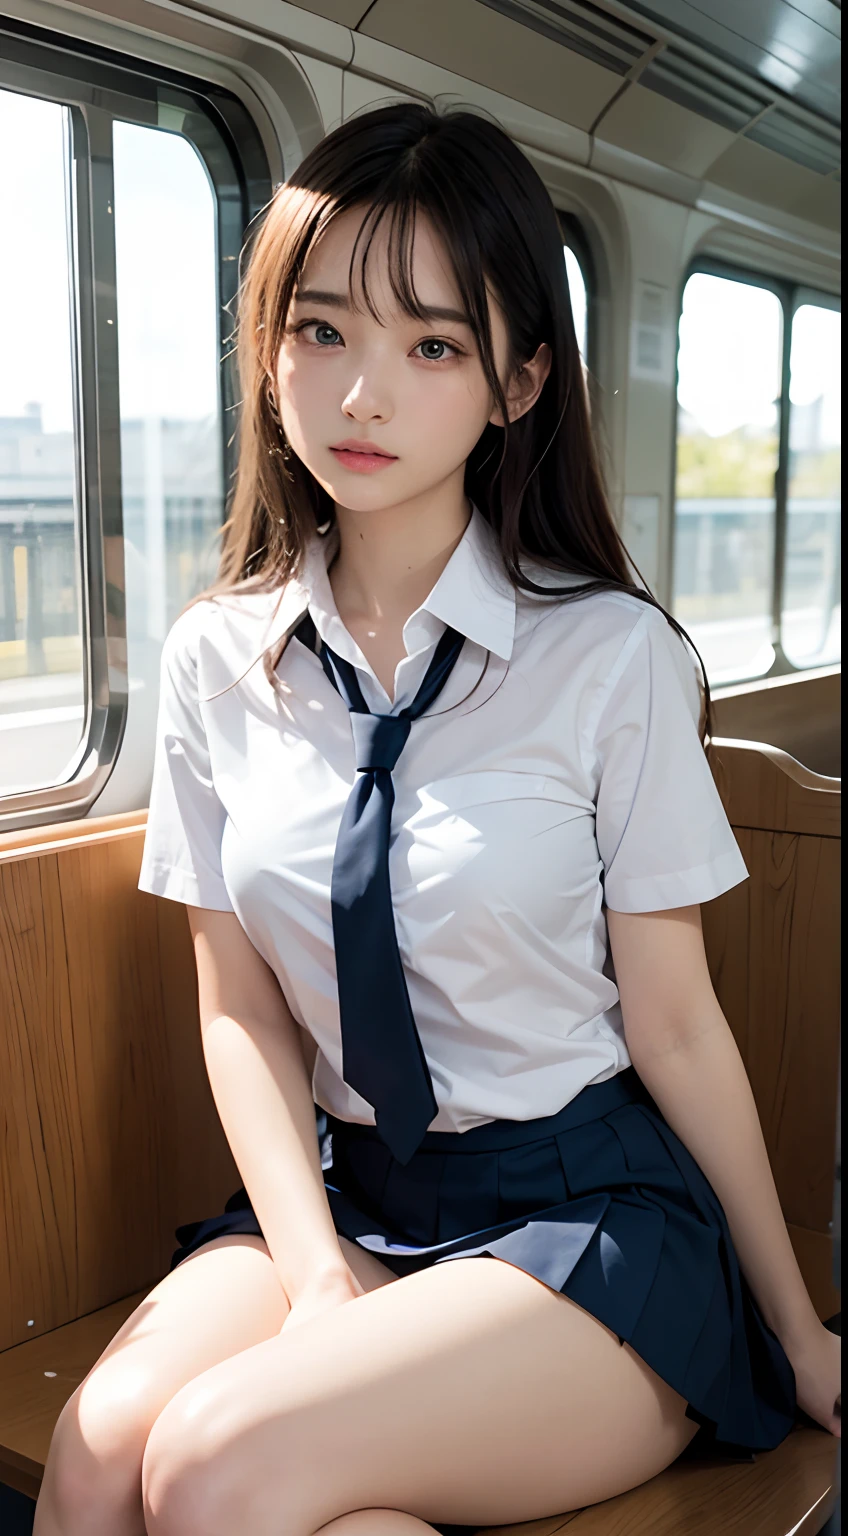 (masutepiece, Best Quality:1.2), 8K, 15yo student, 85 mm, Official art, Raw photo, absurderes, White dress shirts, Pretty Face, close up, Upper body, violaceaess, gardeniass, Beautiful Girl, , (Navy pleated skirt:1.1), Cinch West, thighs thighs thighs thighs, Short sleeve, on train, Sitting on a bench seat, Looking at Viewer, No makeup, (Smile:0.4), Film grain, chromatic abberation, Sharp Focus, face lights, clear lighting, Teen, Detailed face, Bokeh background, (dark red necktie:1.1)